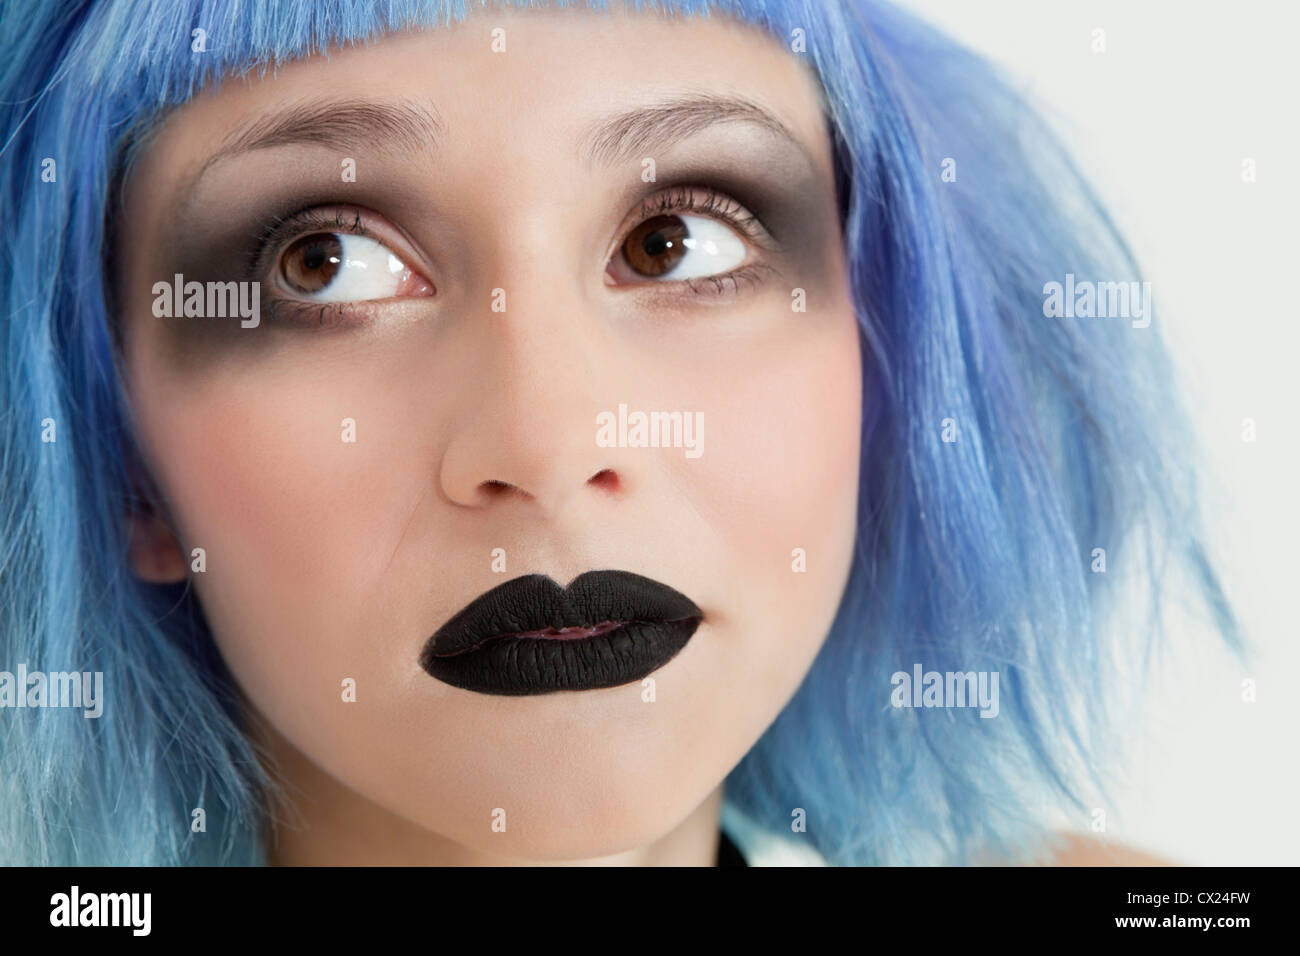 Close-up of young female punk with black lipstick, eye make-up and blue hair Stock Photo